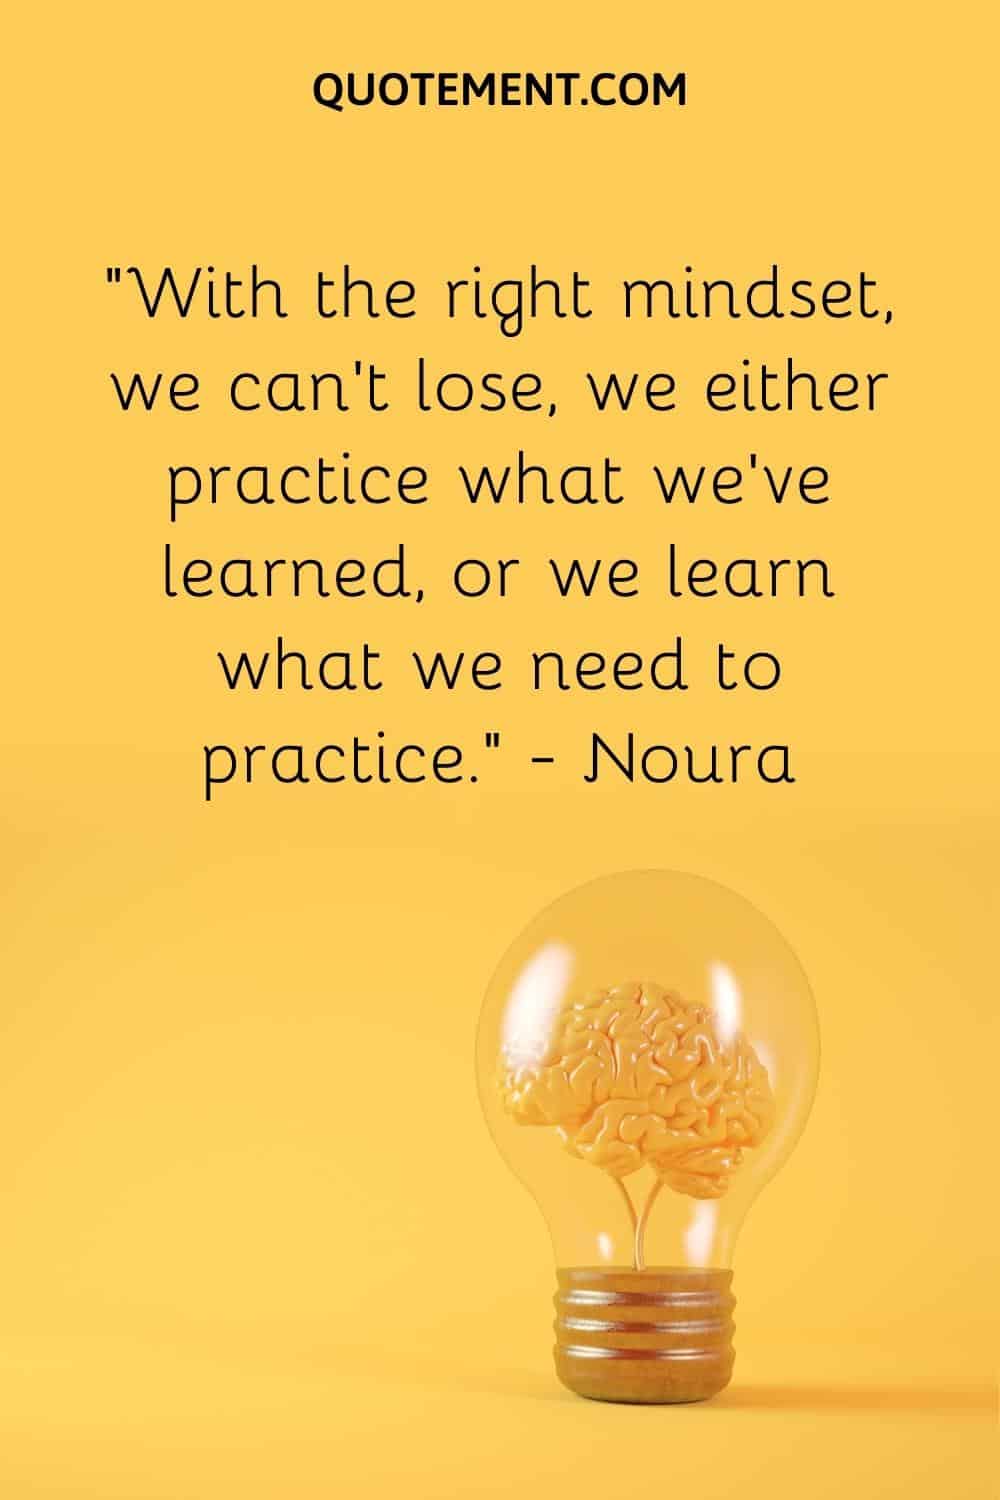 “With the right mindset, we can’t lose, we either practice what we’ve learned, or we learn what we need to practice.” — Noura
